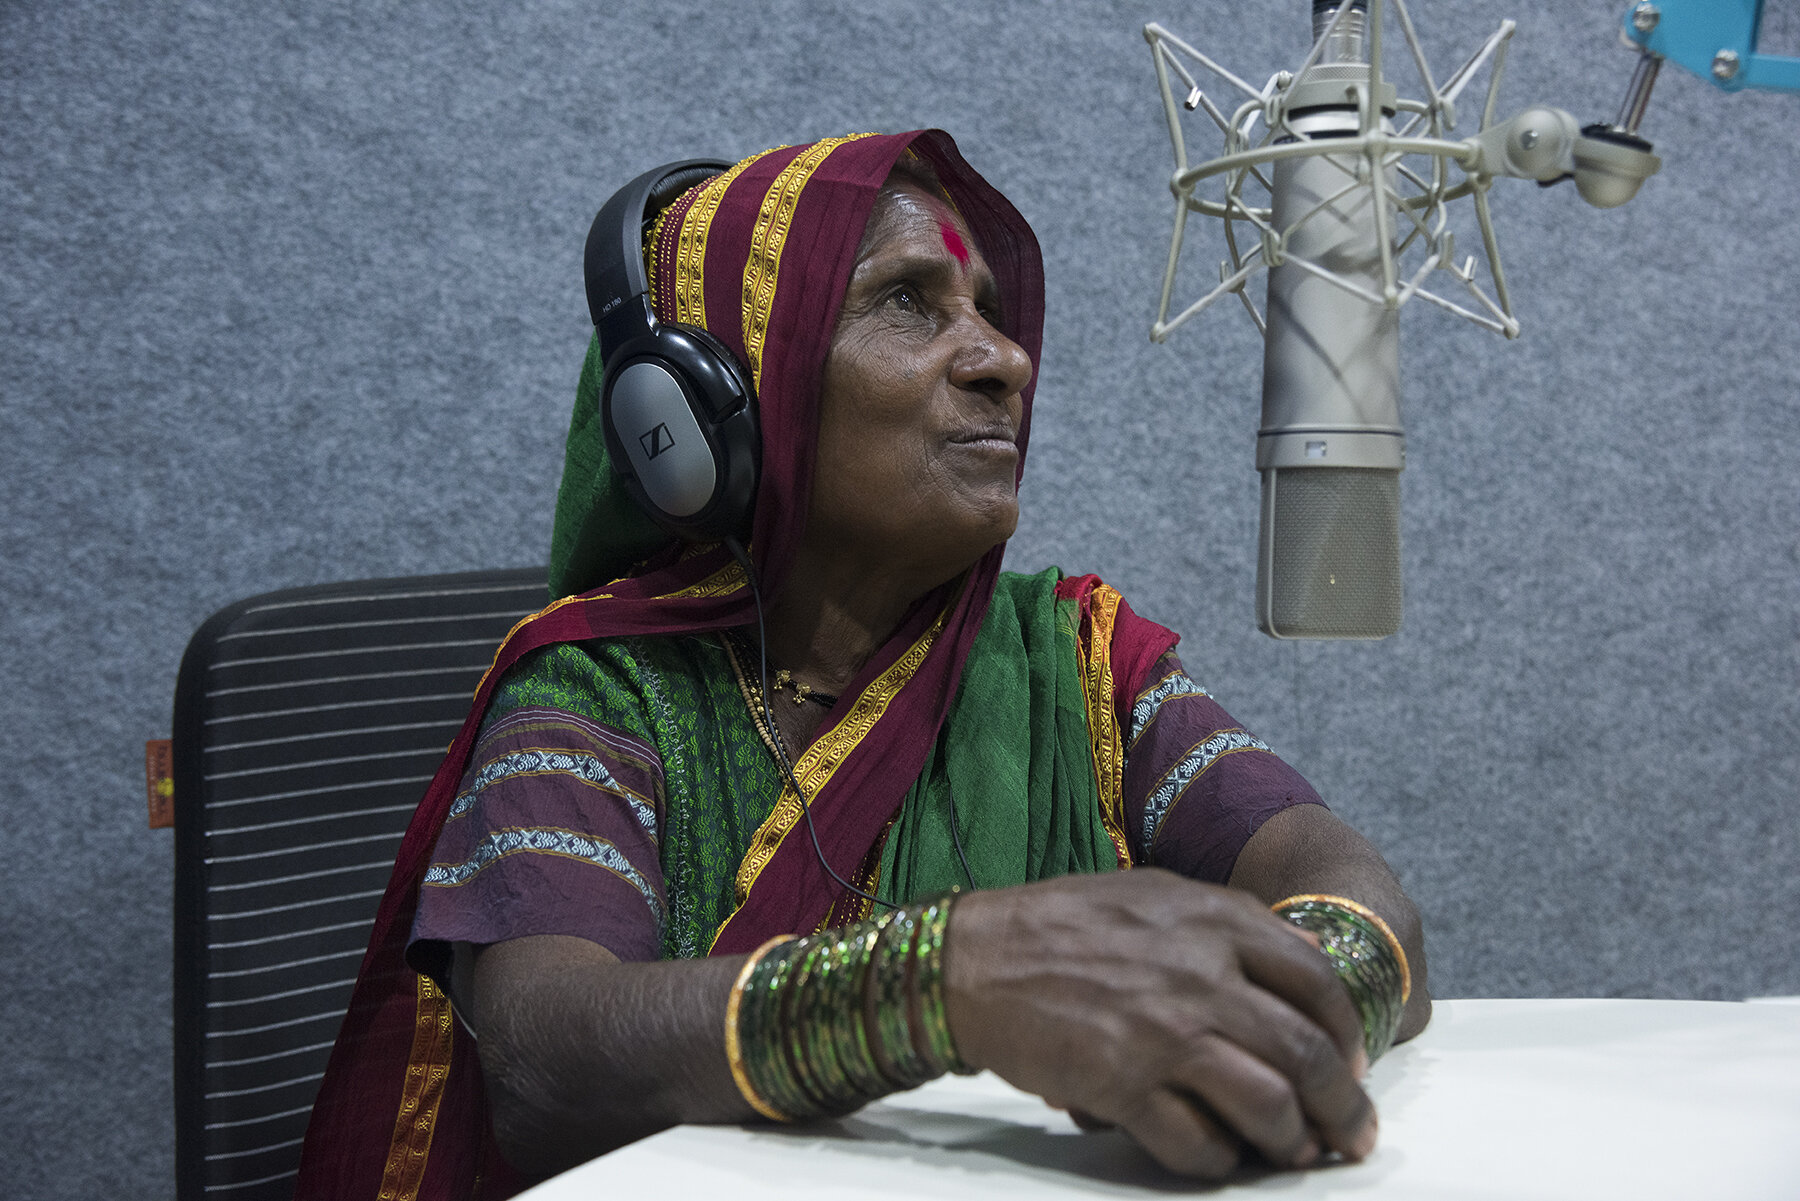  Kirabai Sargar, 60,from Mhaswad, Satara,&nbsp; gets ready for her weekly show on the Mann Deshi local radio station. It was only when she was 50 that, one day, while walking with her son near her house, she saw a notice about a radio show being orga